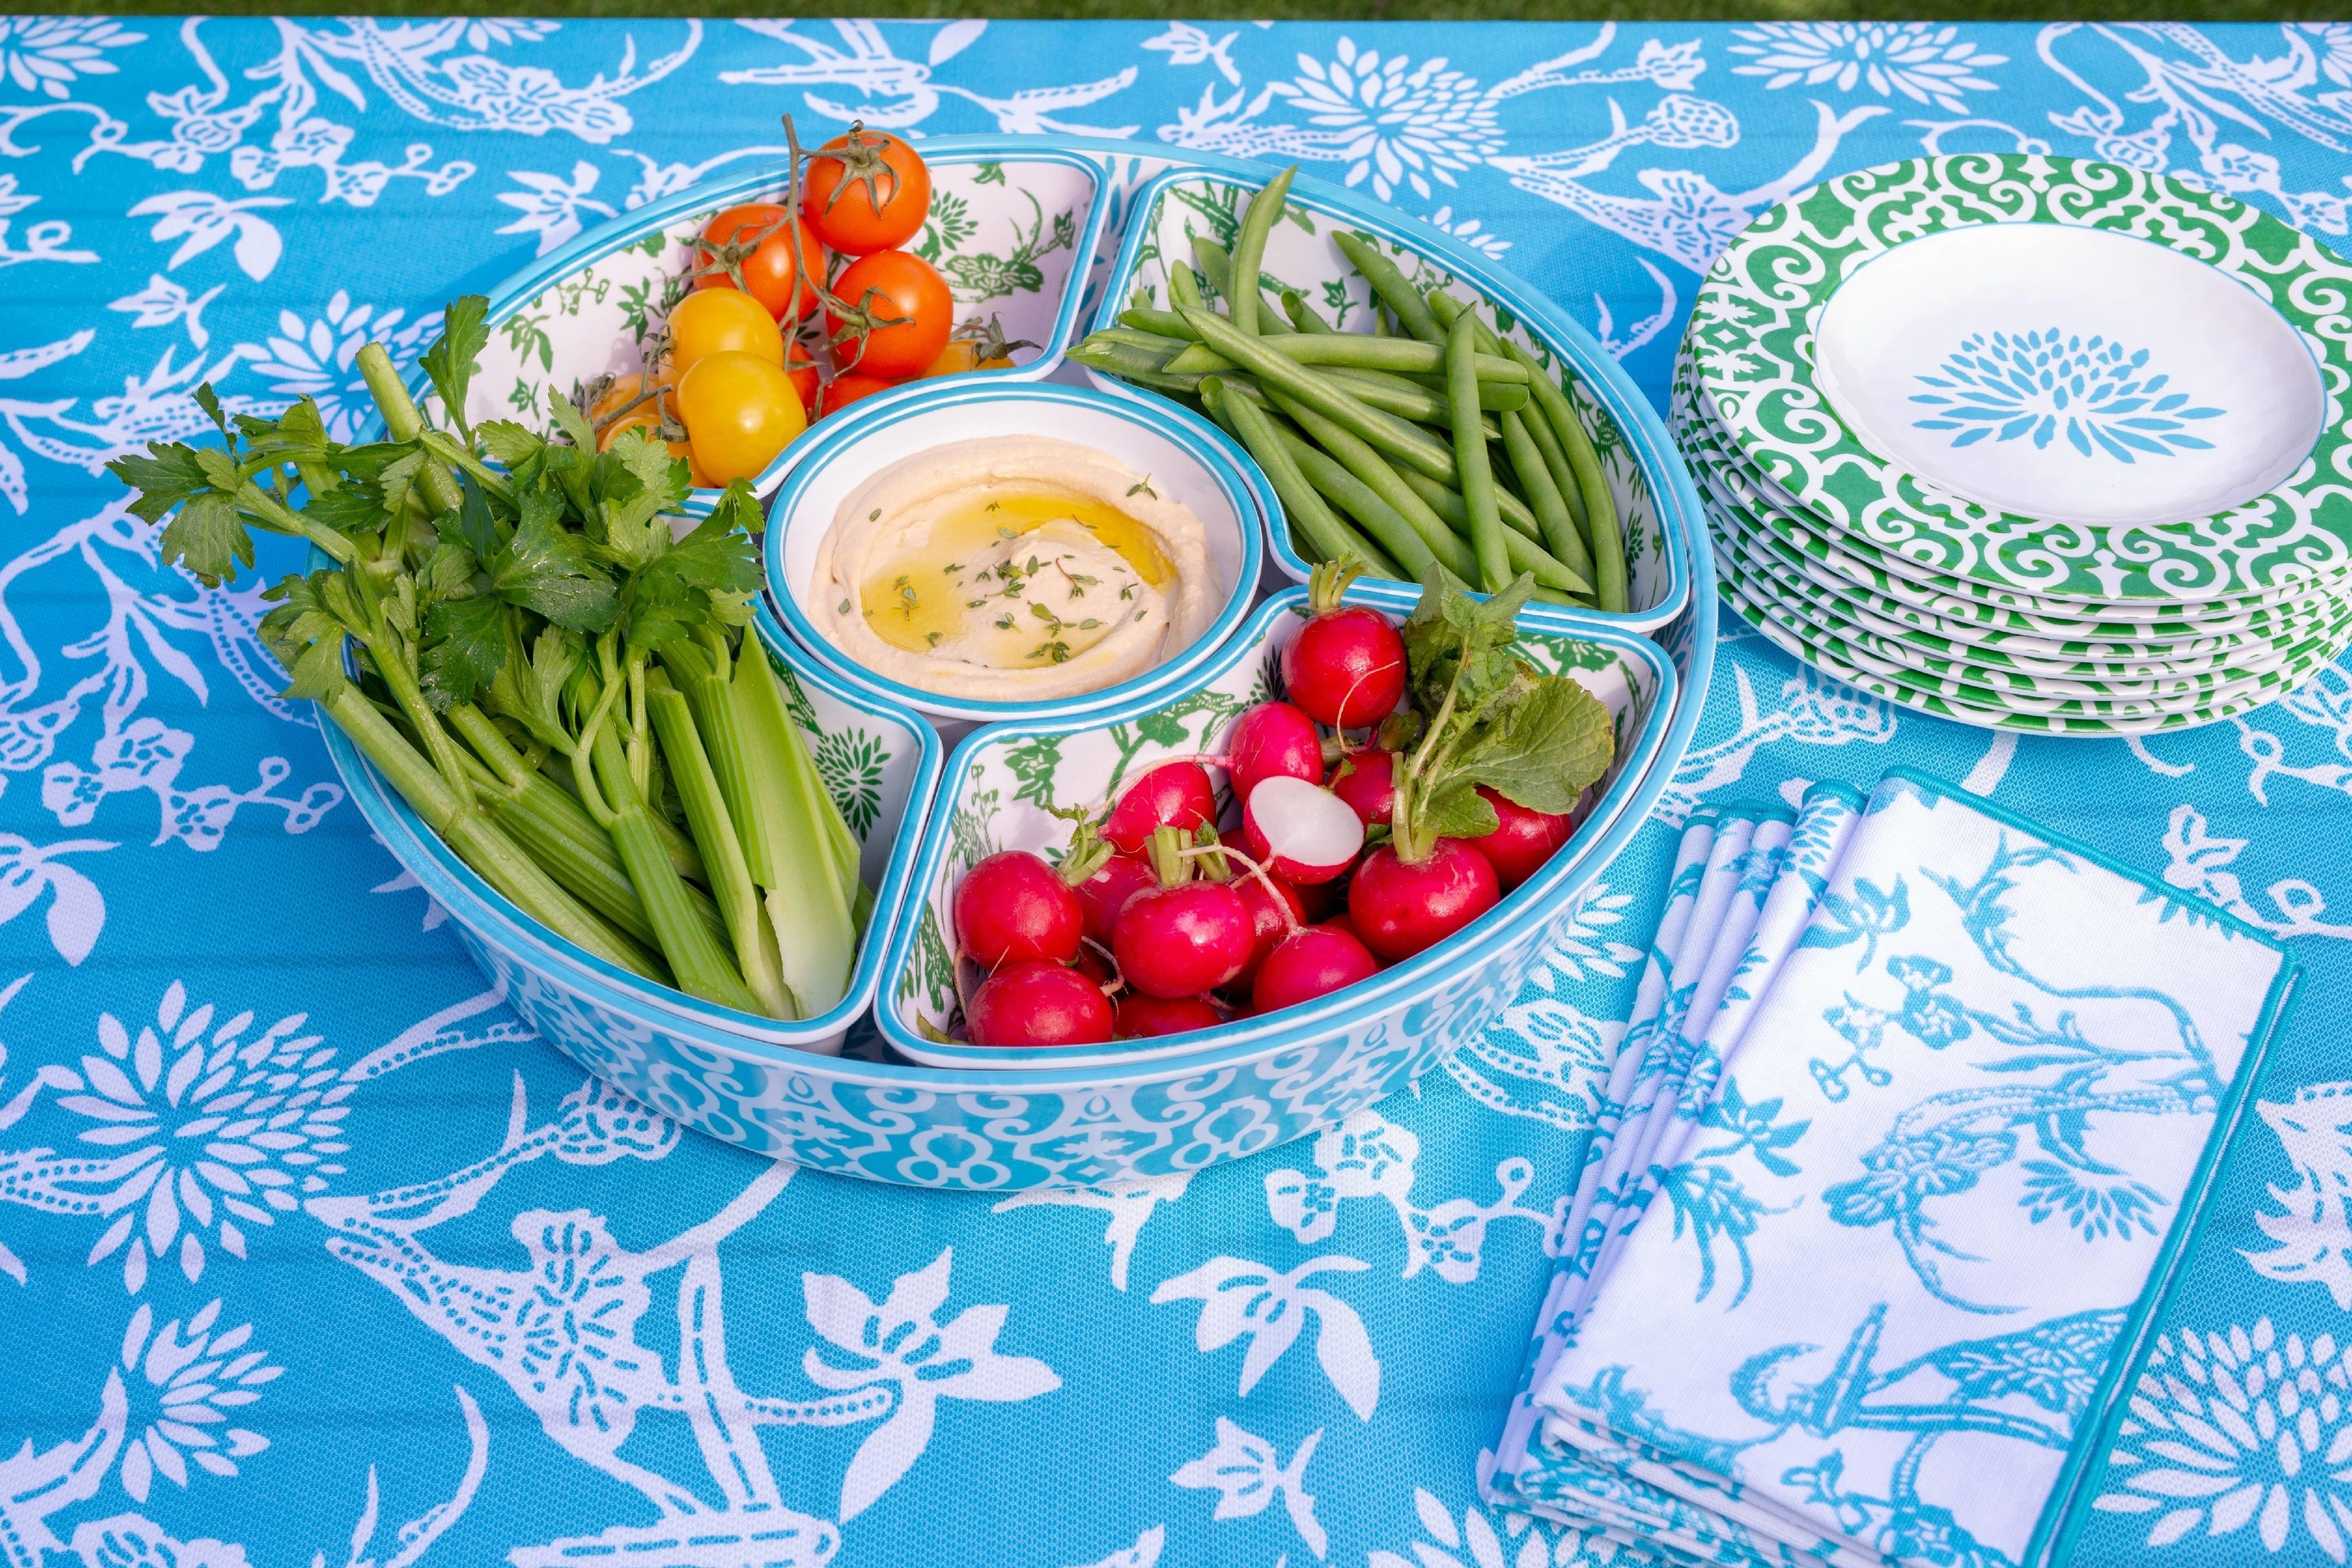 The blue patterned bowl on a blue patterned tablecloth